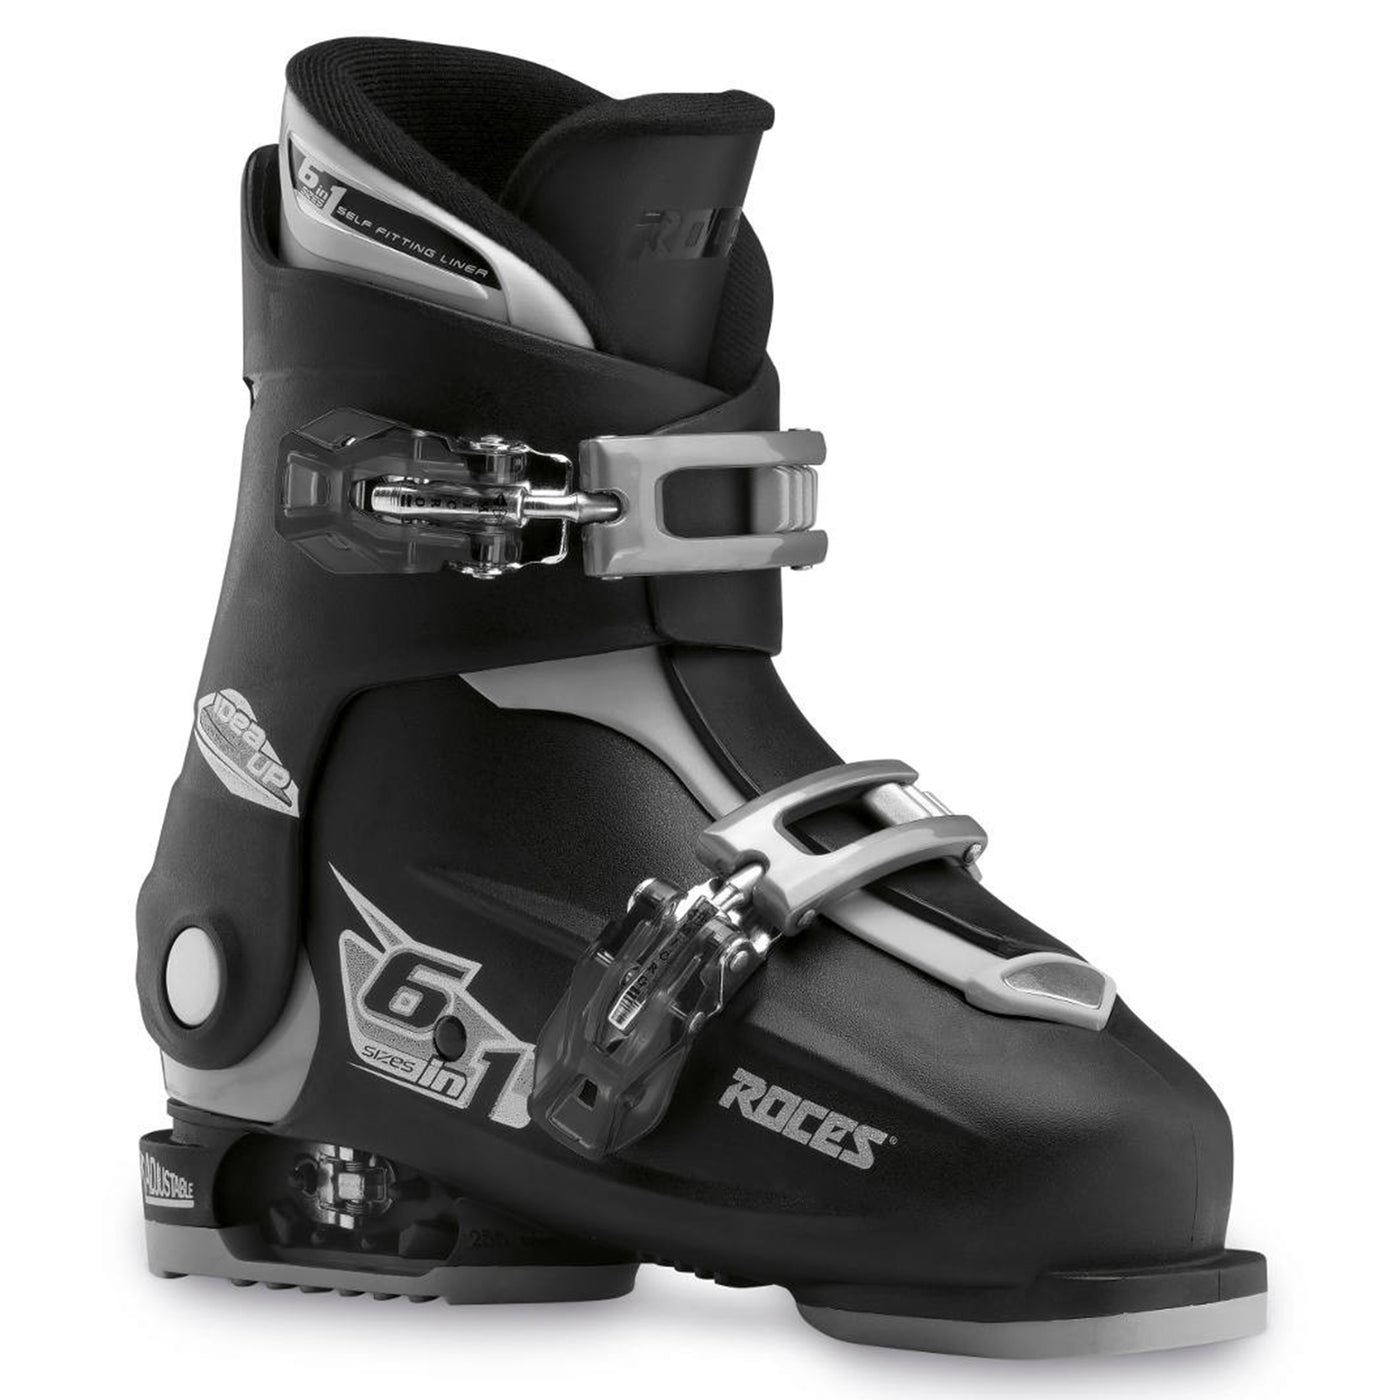 Roces IDEA Up Adjustable Youth Ski Boots | Size 19.0 - 22.0 MP SKI BOOTS Roces Black/Silver  